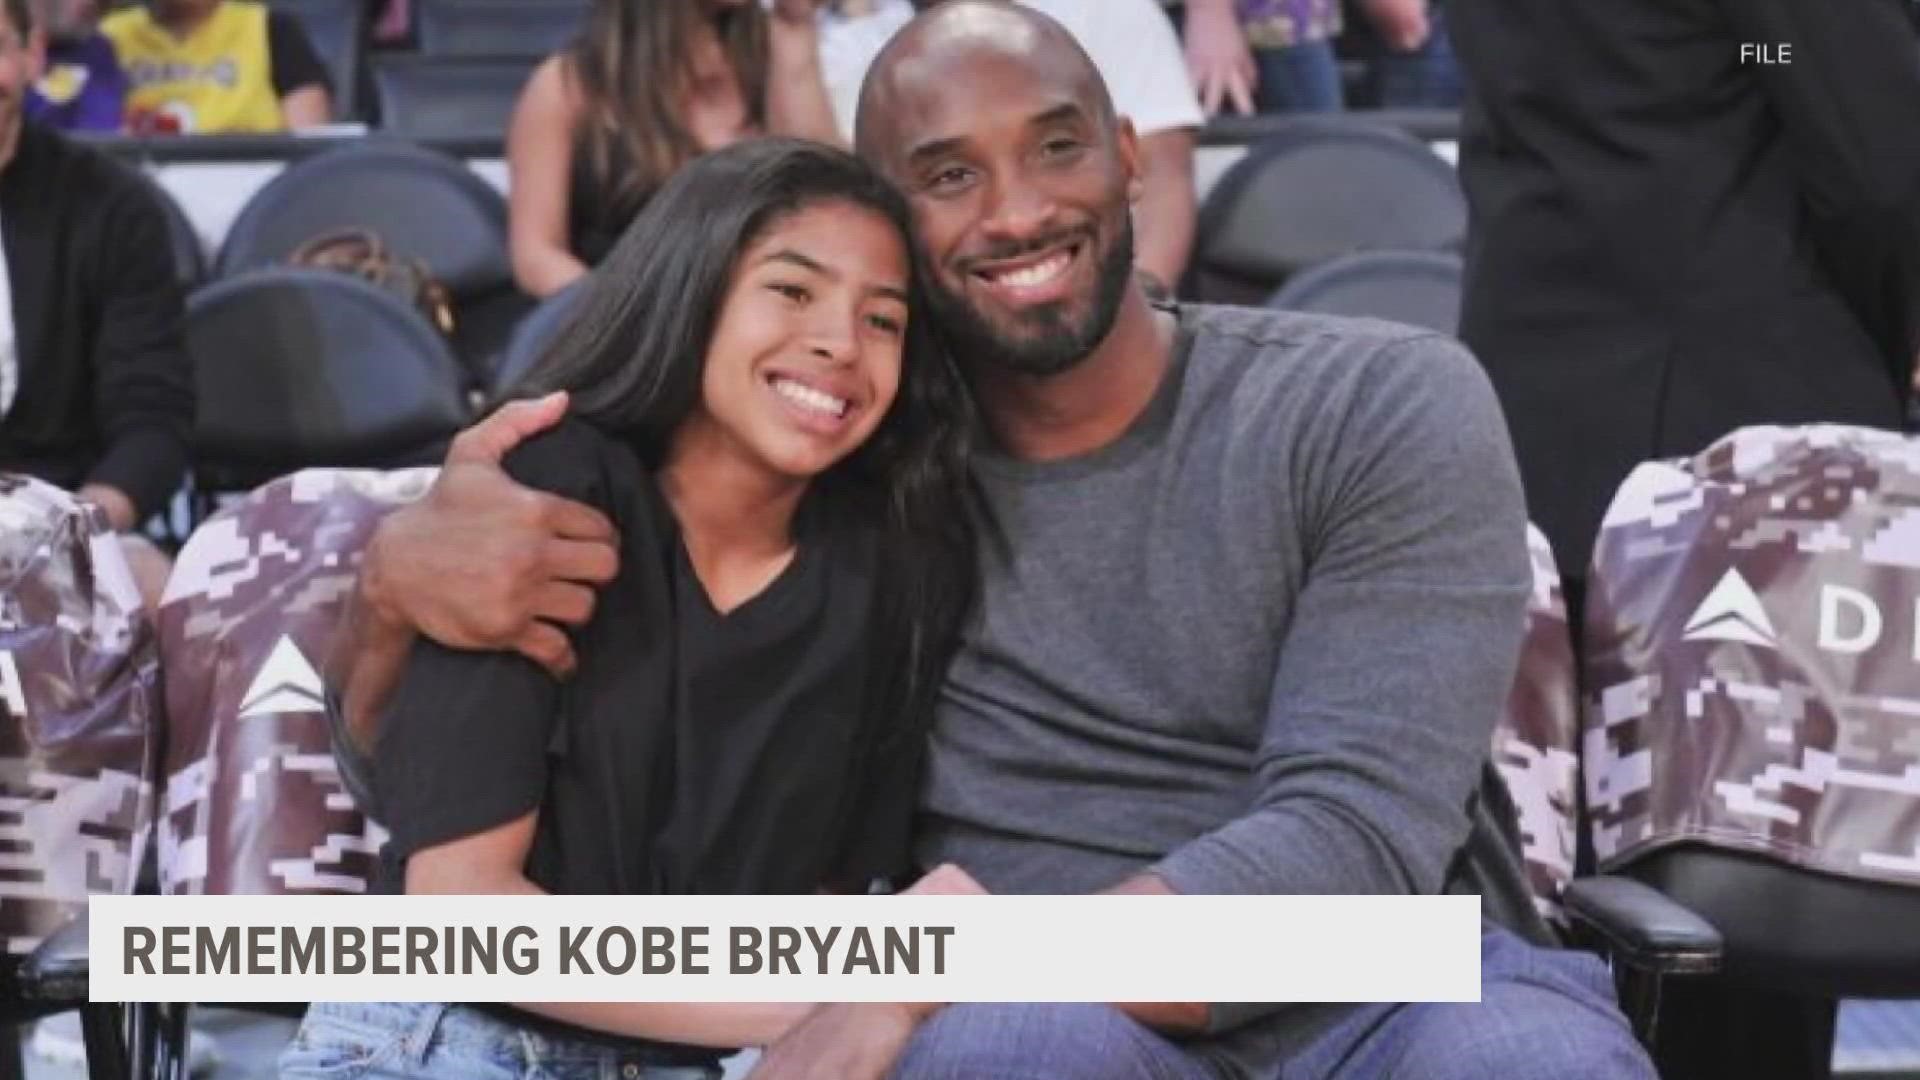 Kobe Bryant was 41-years-old, and his daughter Gianna just 13 when they crashed in Calabasas on their way to a basketball tournament.